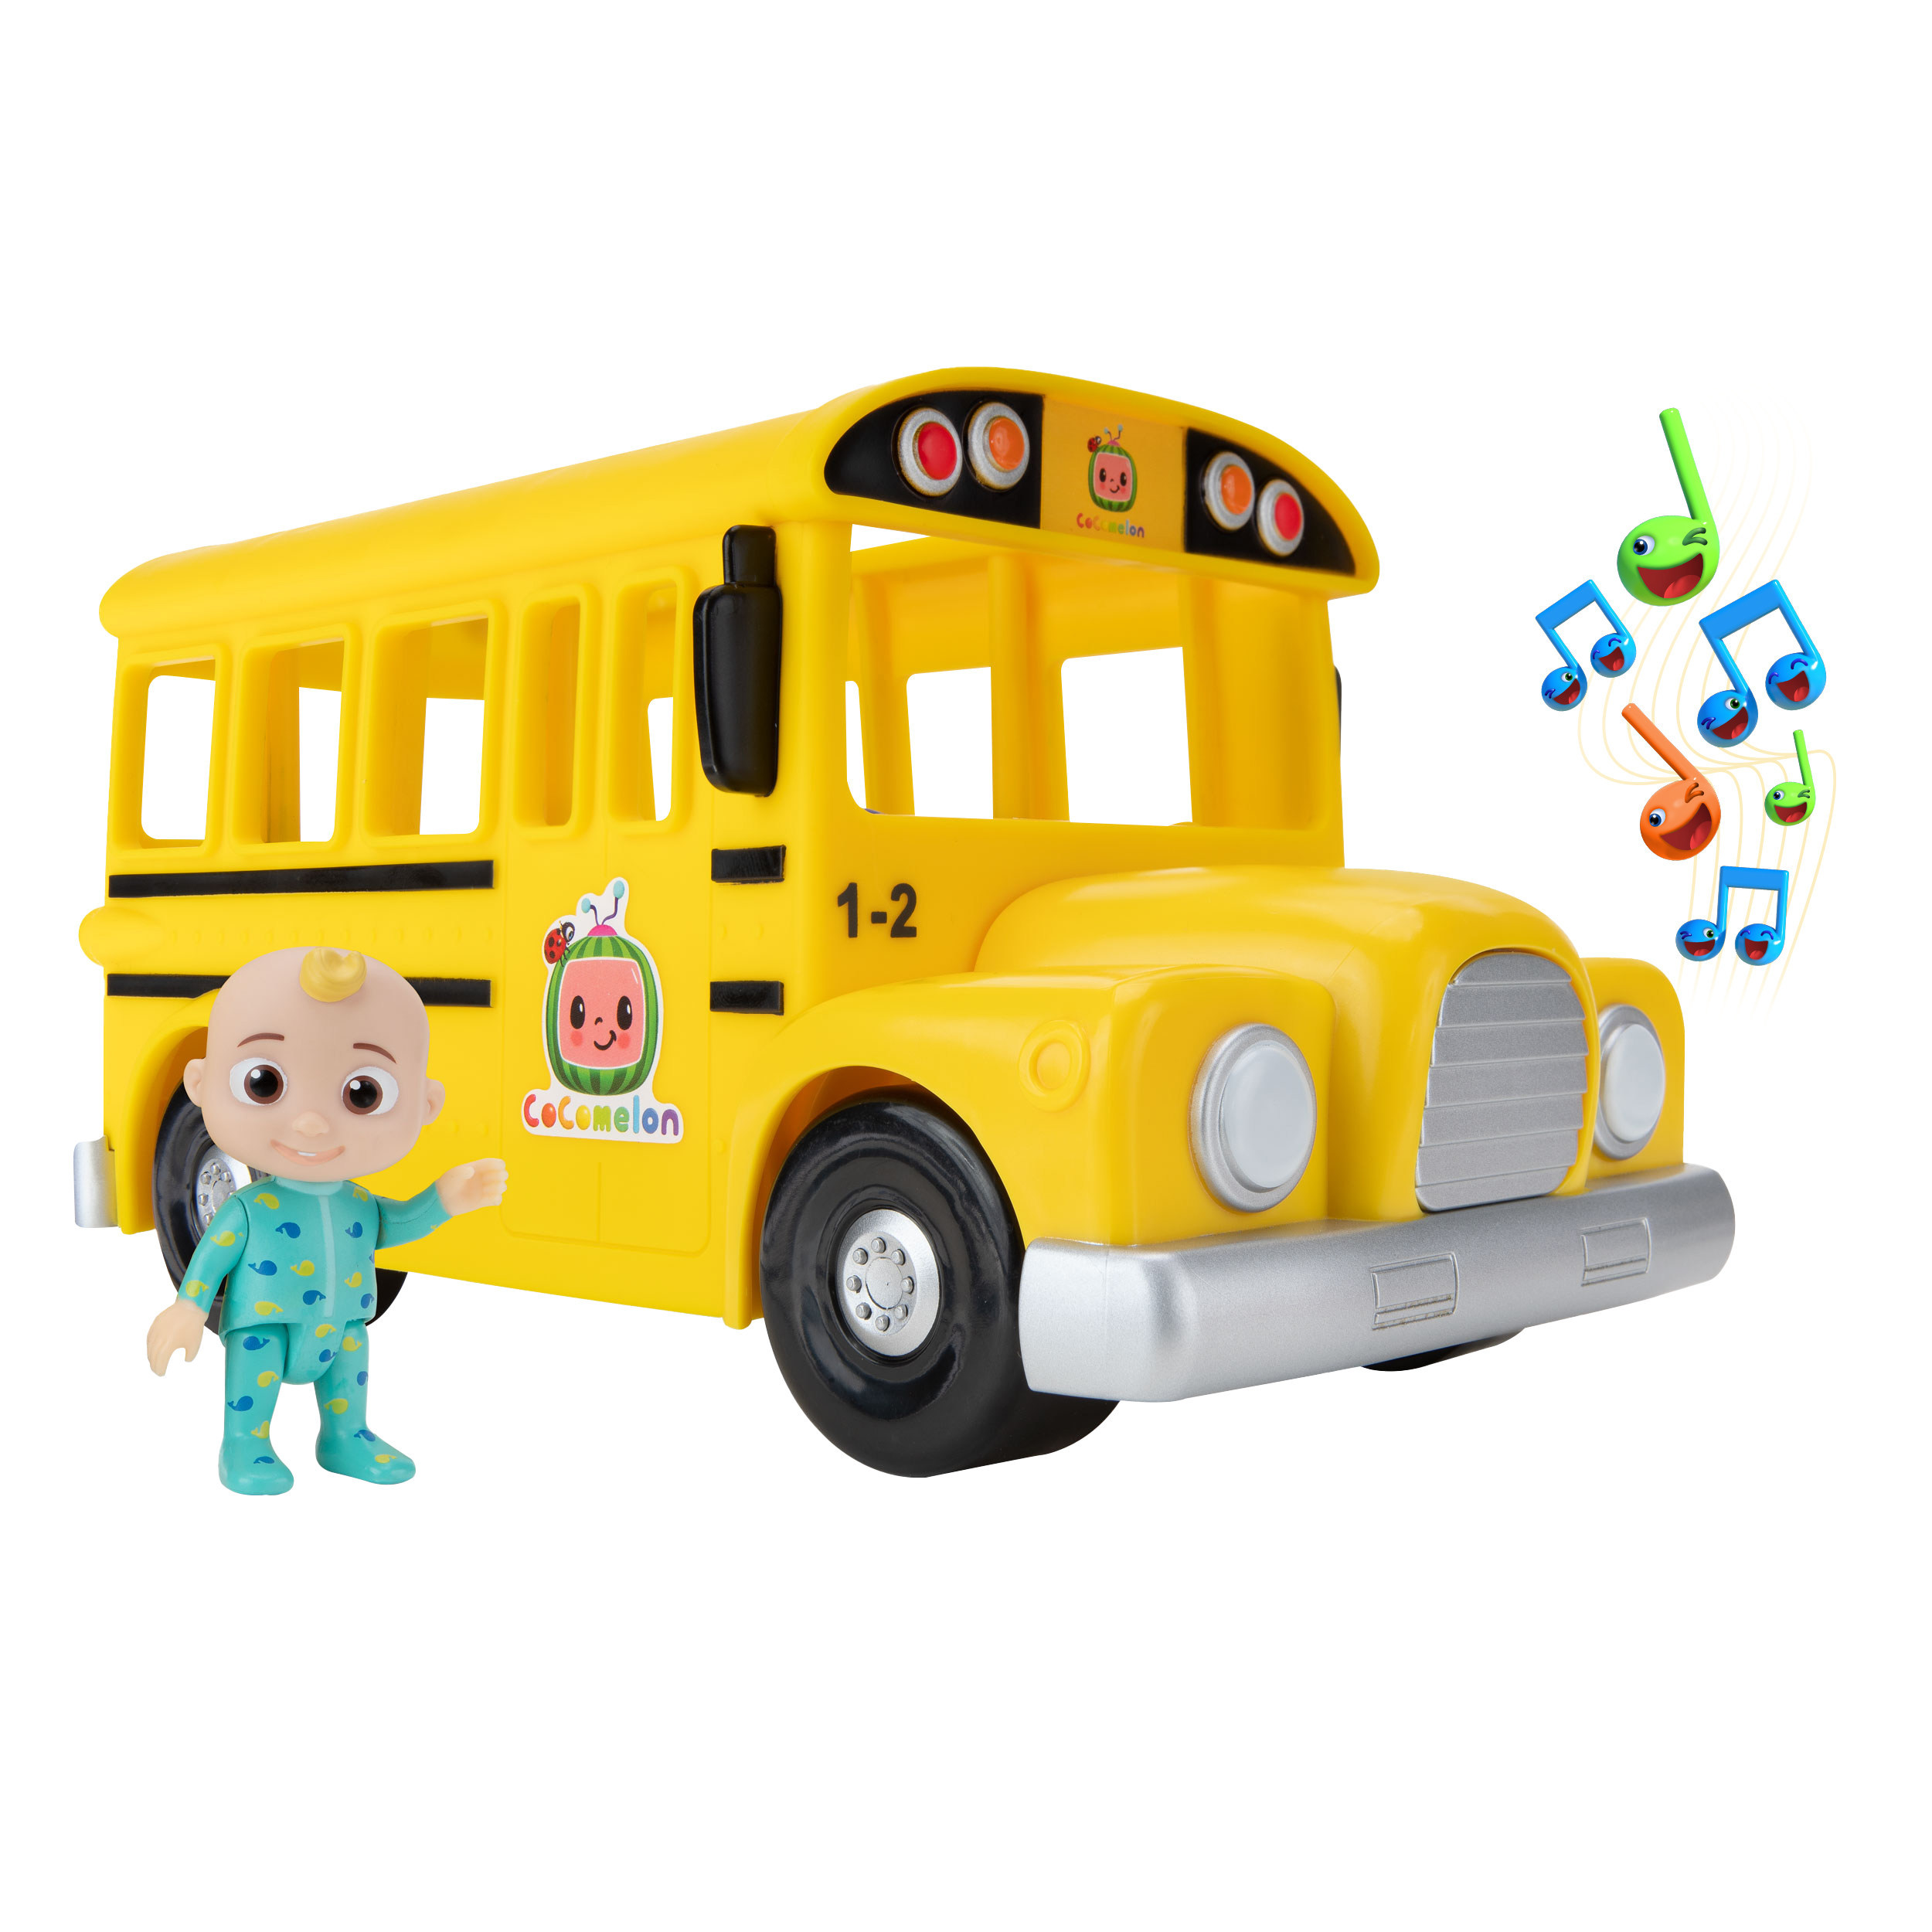 Jazwares Debuts First Toy Line For Cocomelon The 1 Youtube Channel For Kids And Preschoolers - roblox toys norge